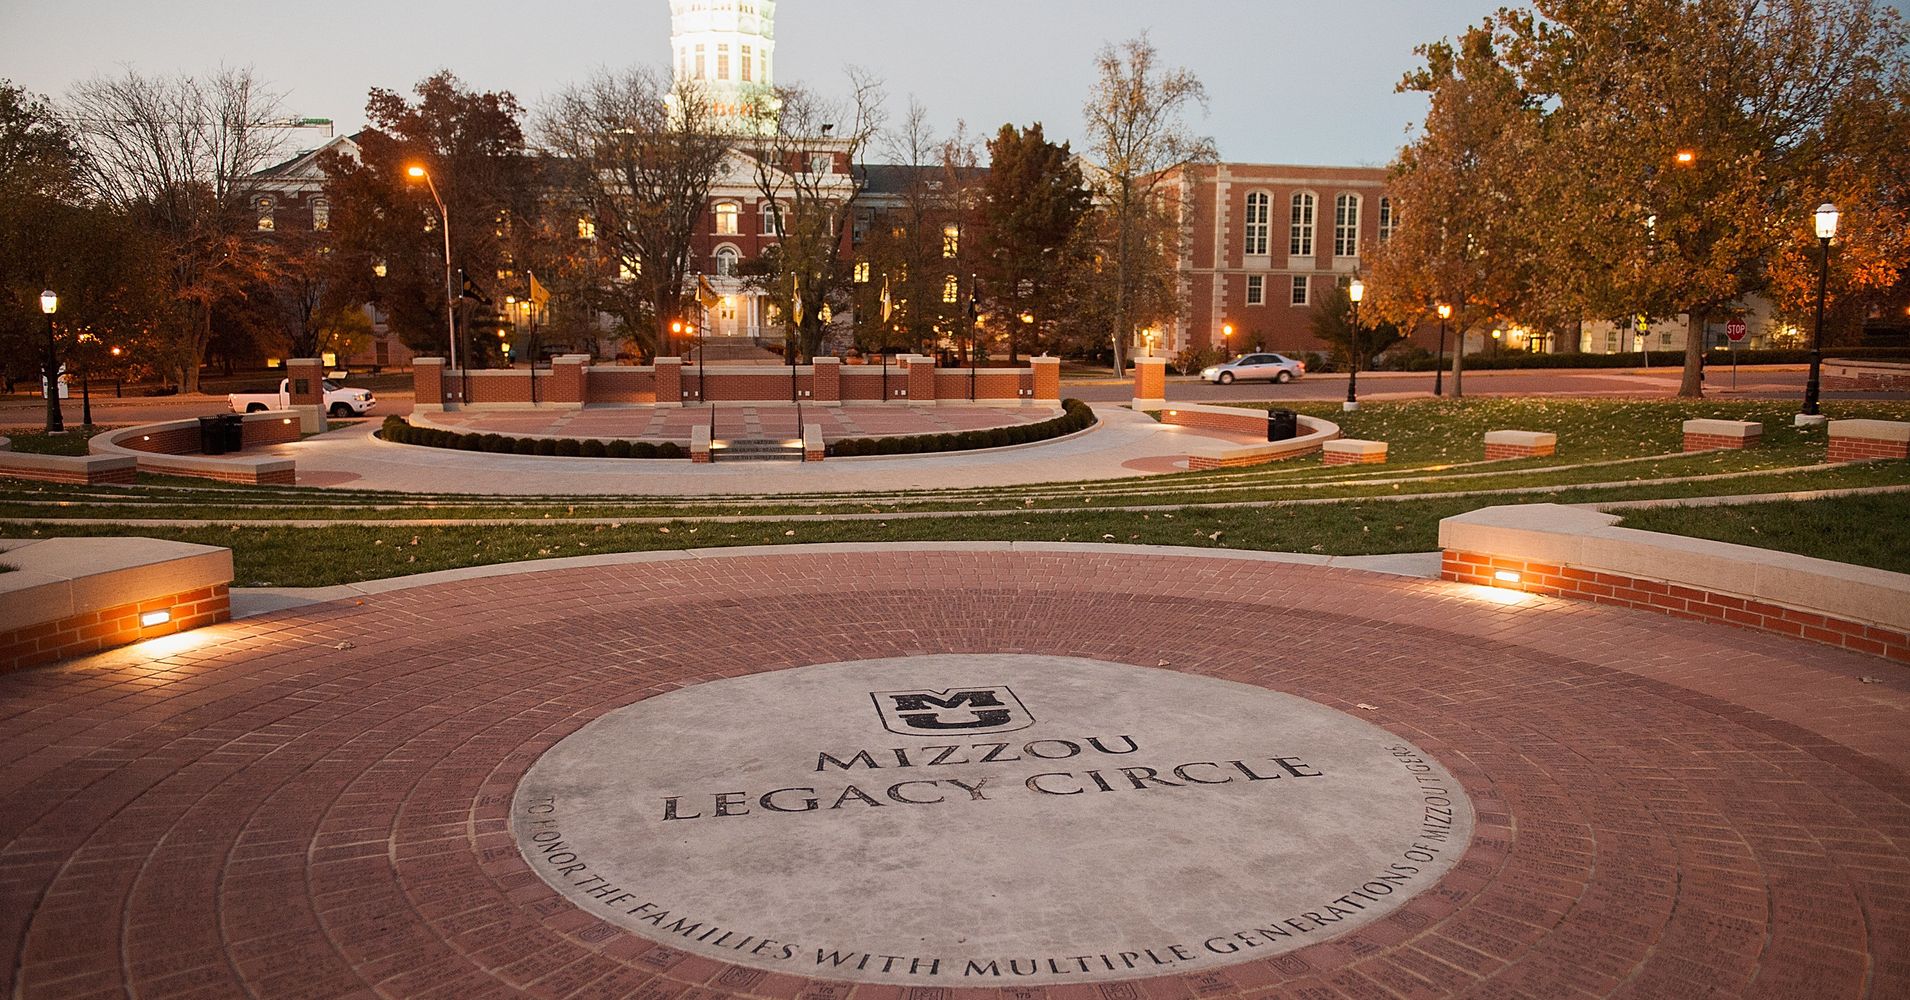 Mizzou Students Say Turmoil Following Protests Shows Culture Change